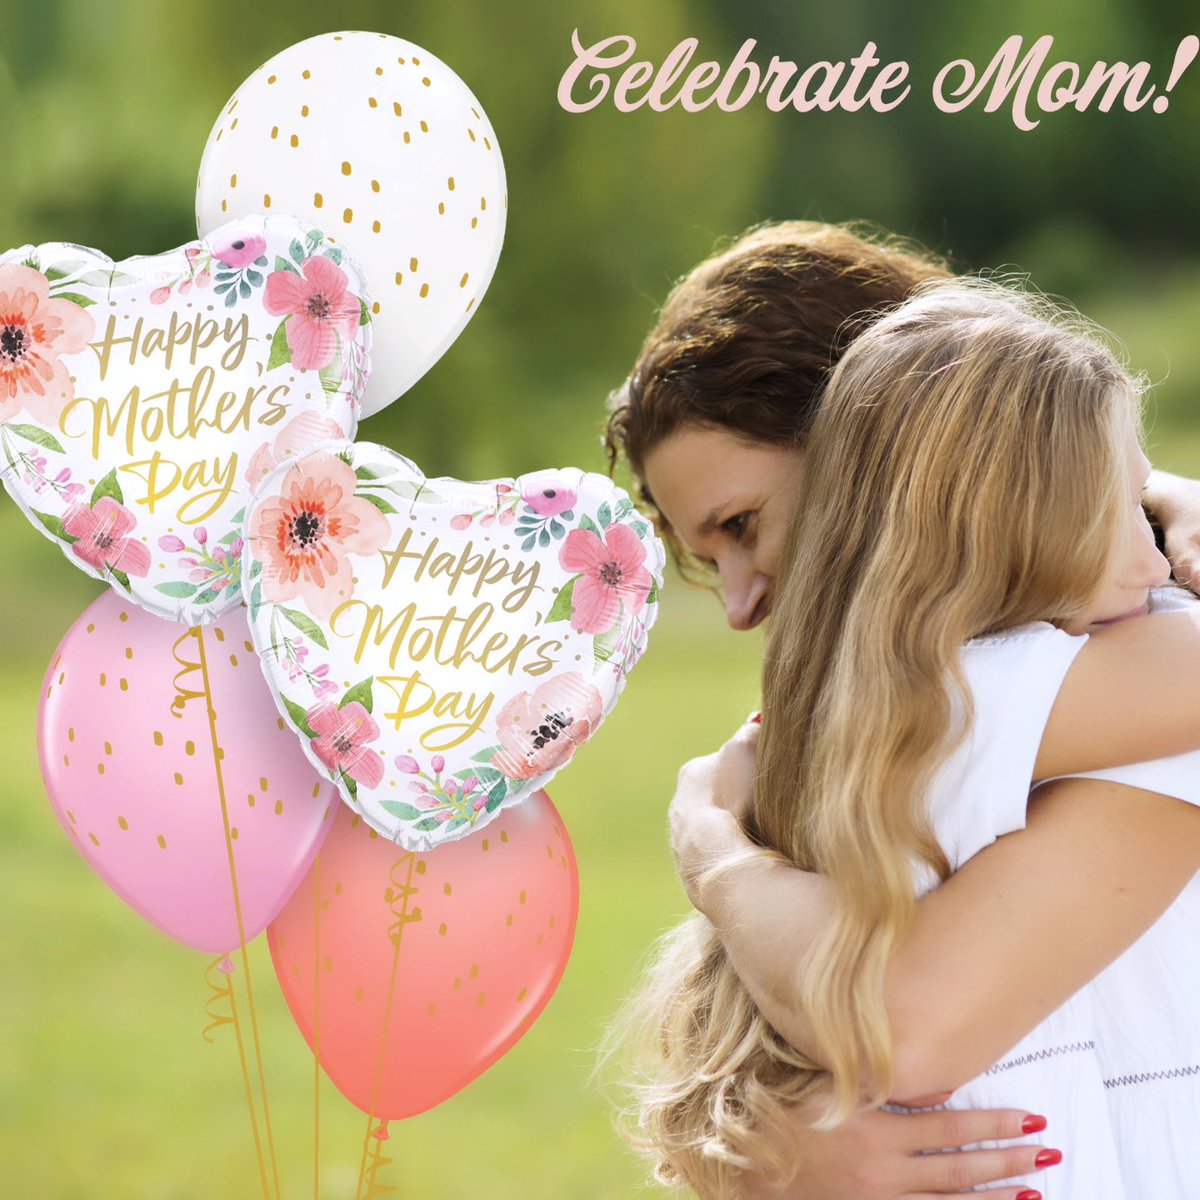 Be sure to celebrate MOM this Mother's Day! Our balloon bouquets are a great start.
.
.
.
#mothersday #mothersdaygift #mom #nolapartystore #nolapartysupplies #partystop #partystopnola #balloons #balloondecor